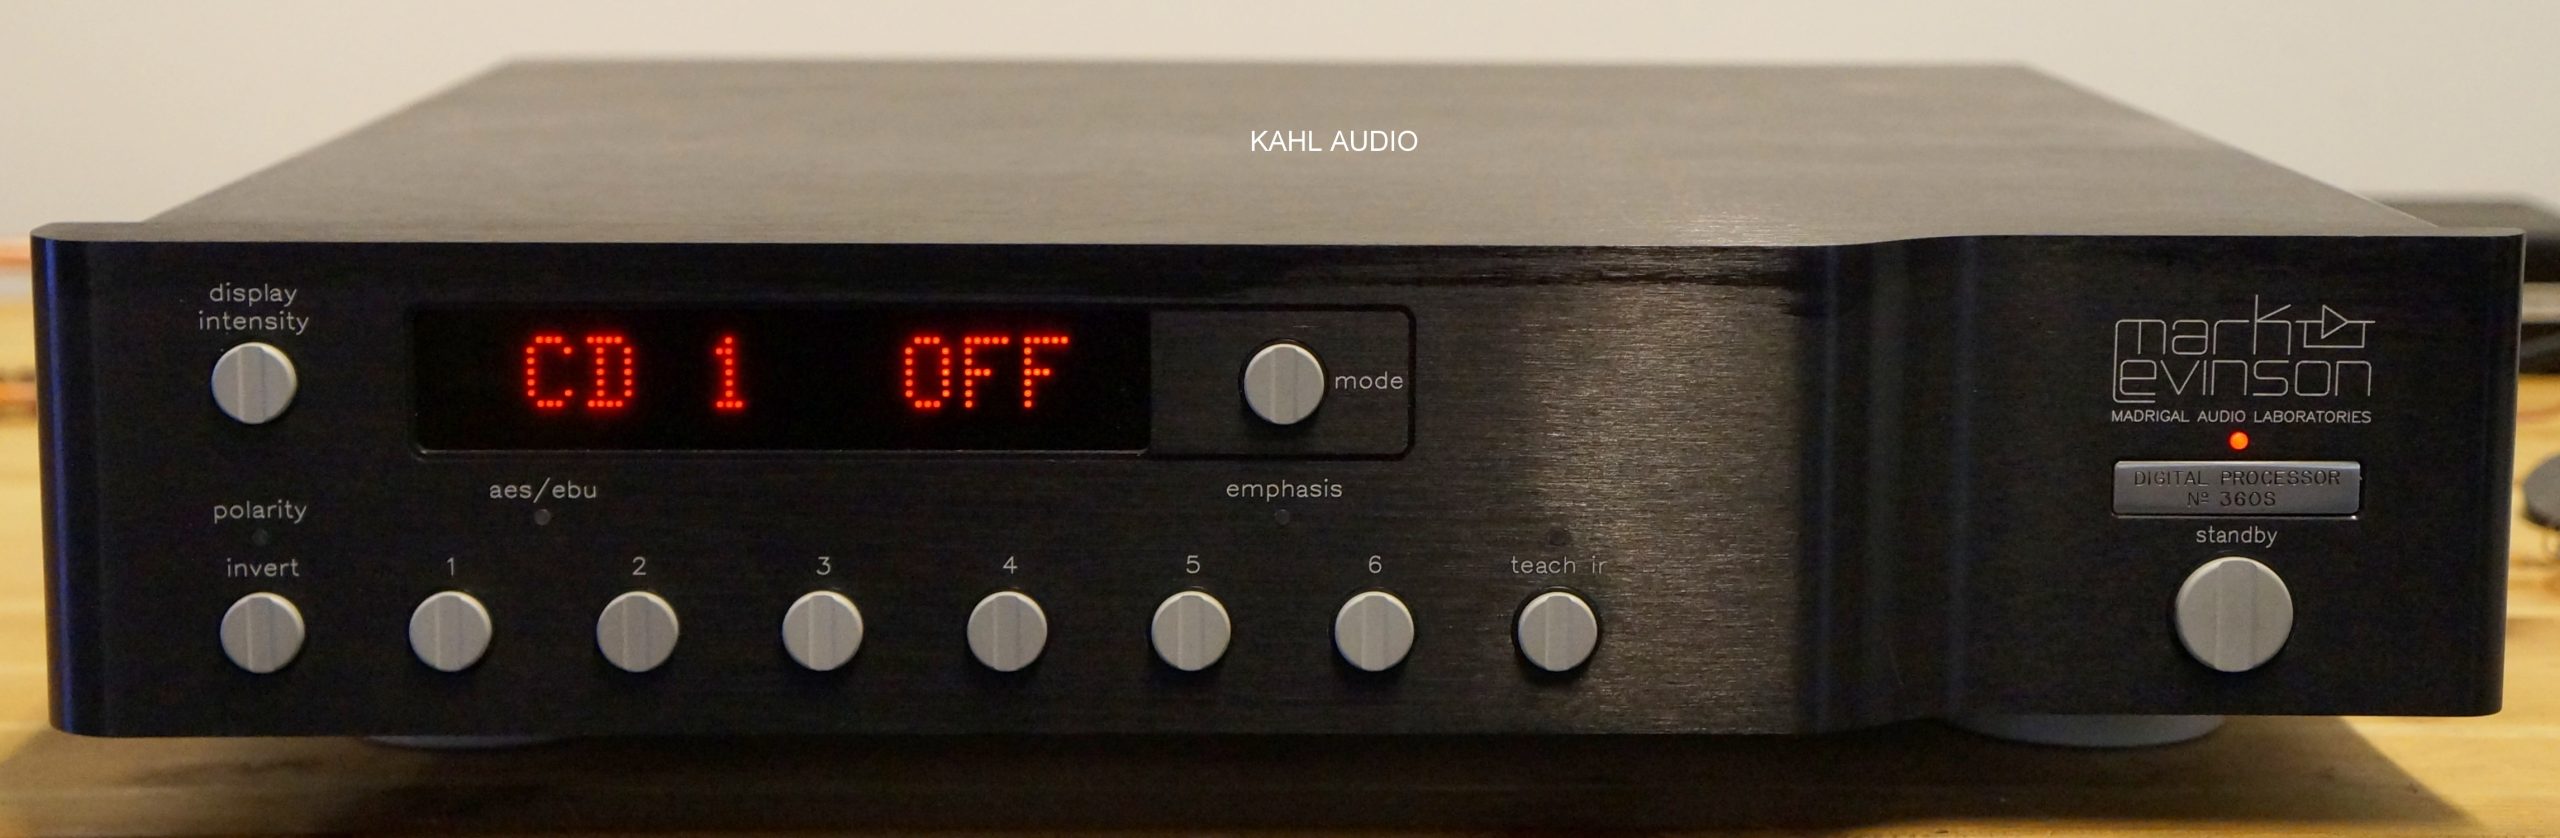 Mark Levinson No.360S DAC. HDCD capable. Lots of positive reviews. $7,500  MSRP